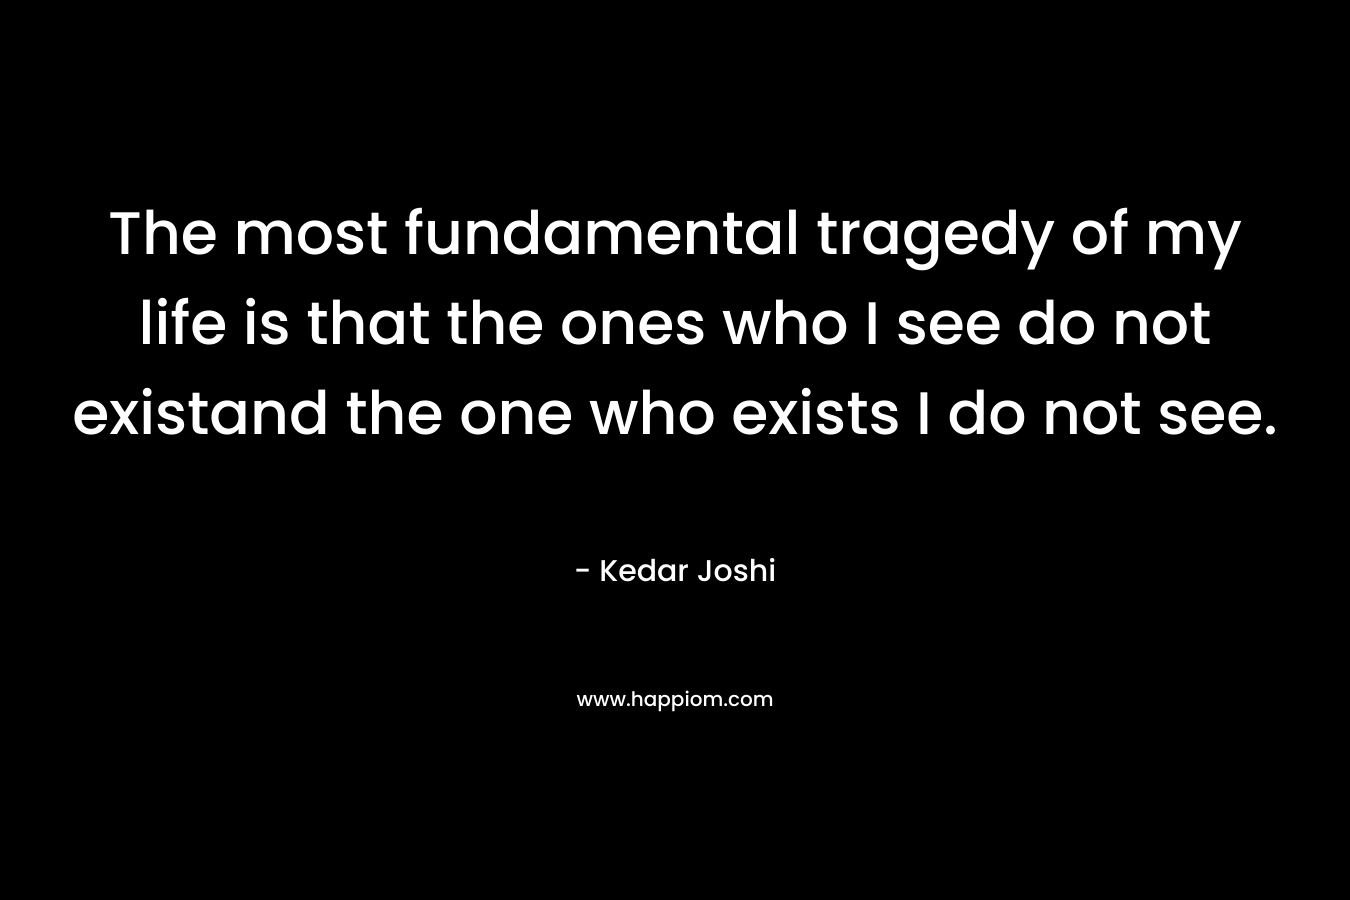 The most fundamental tragedy of my life is that the ones who I see do not existand the one who exists I do not see.